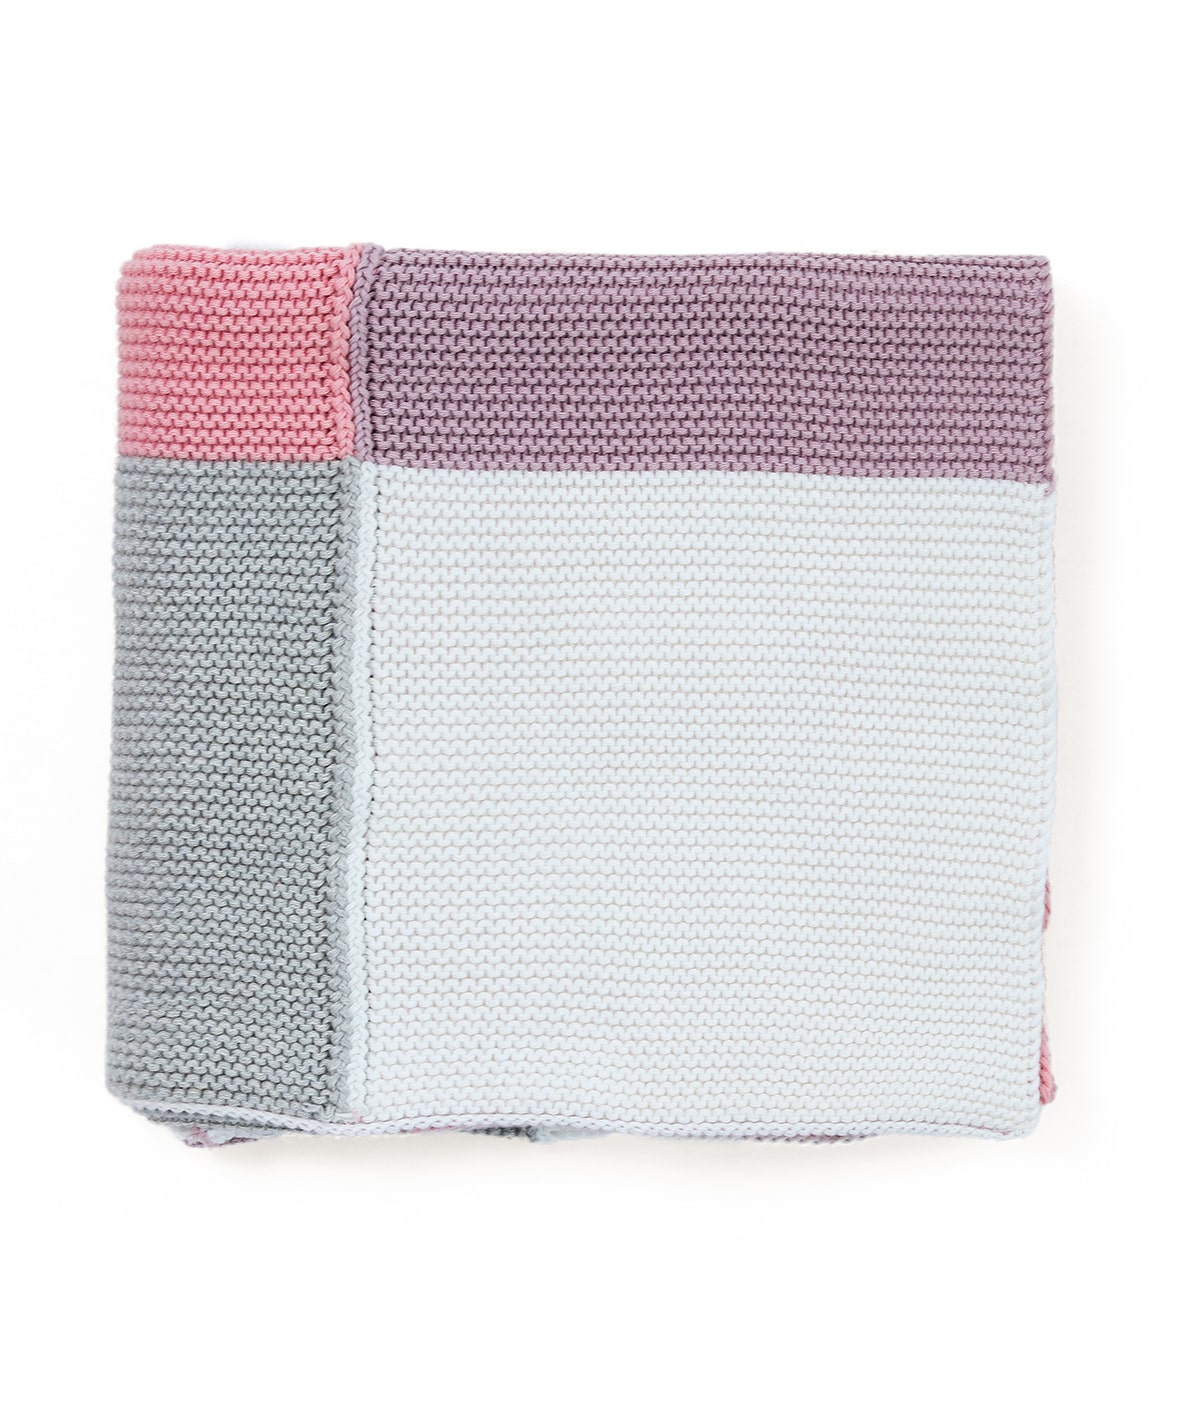 Transfer Knit Color Blocks with Stripes- Bubblegum Pink Color Cotton Knitted Ac Blanket For Baby / Infant / New Born For Use In All Seasons